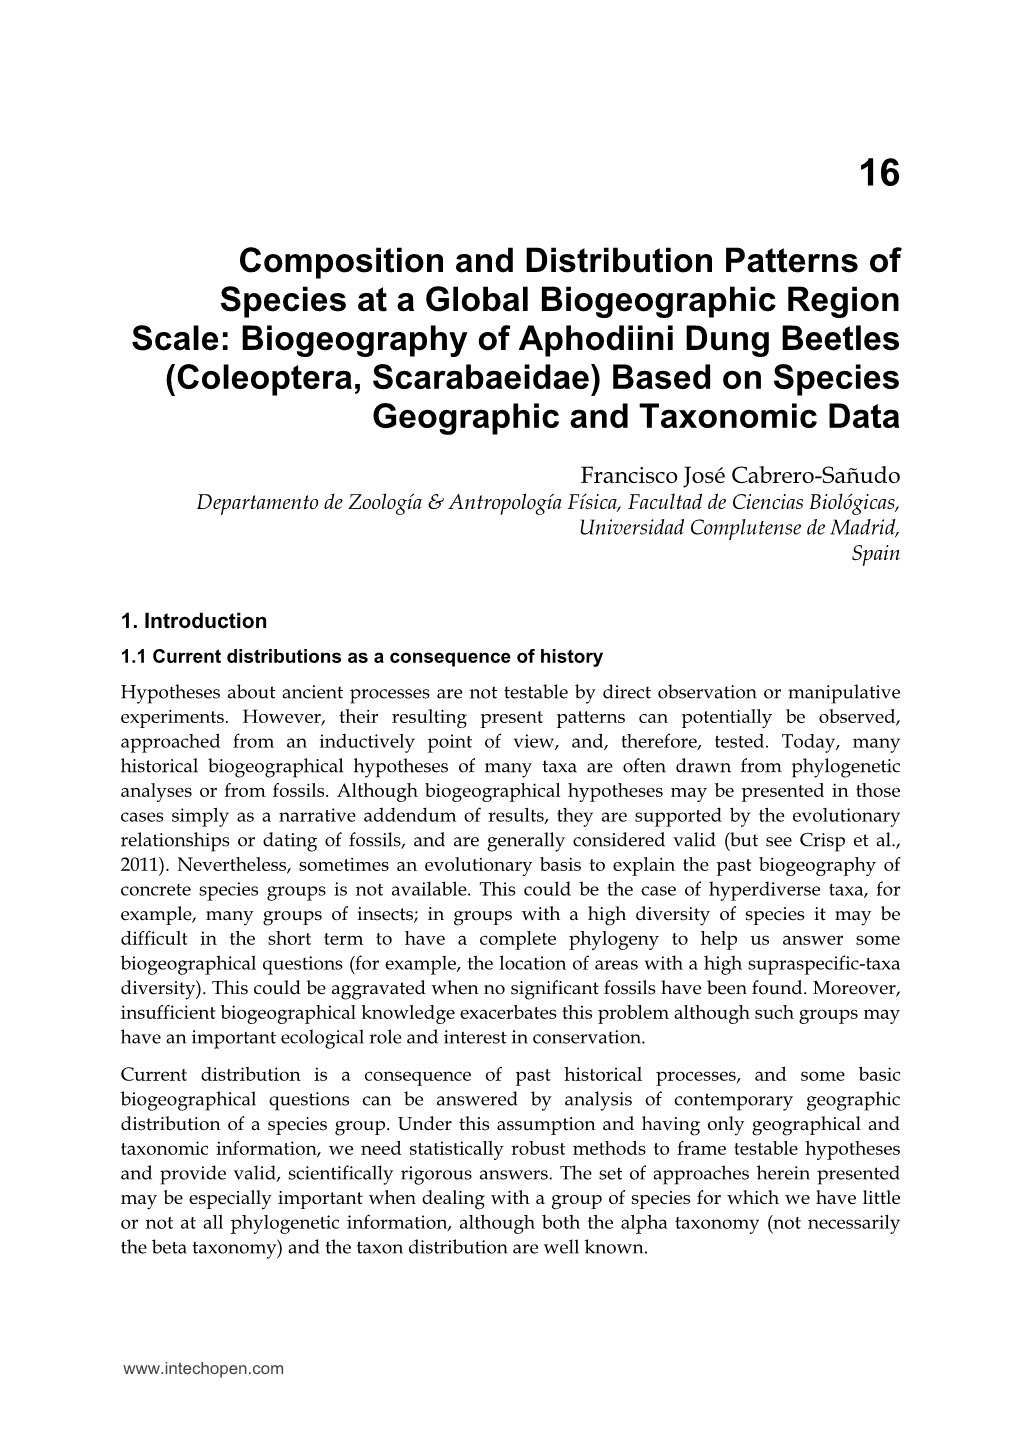 Composition and Distribution Patterns of Species at A